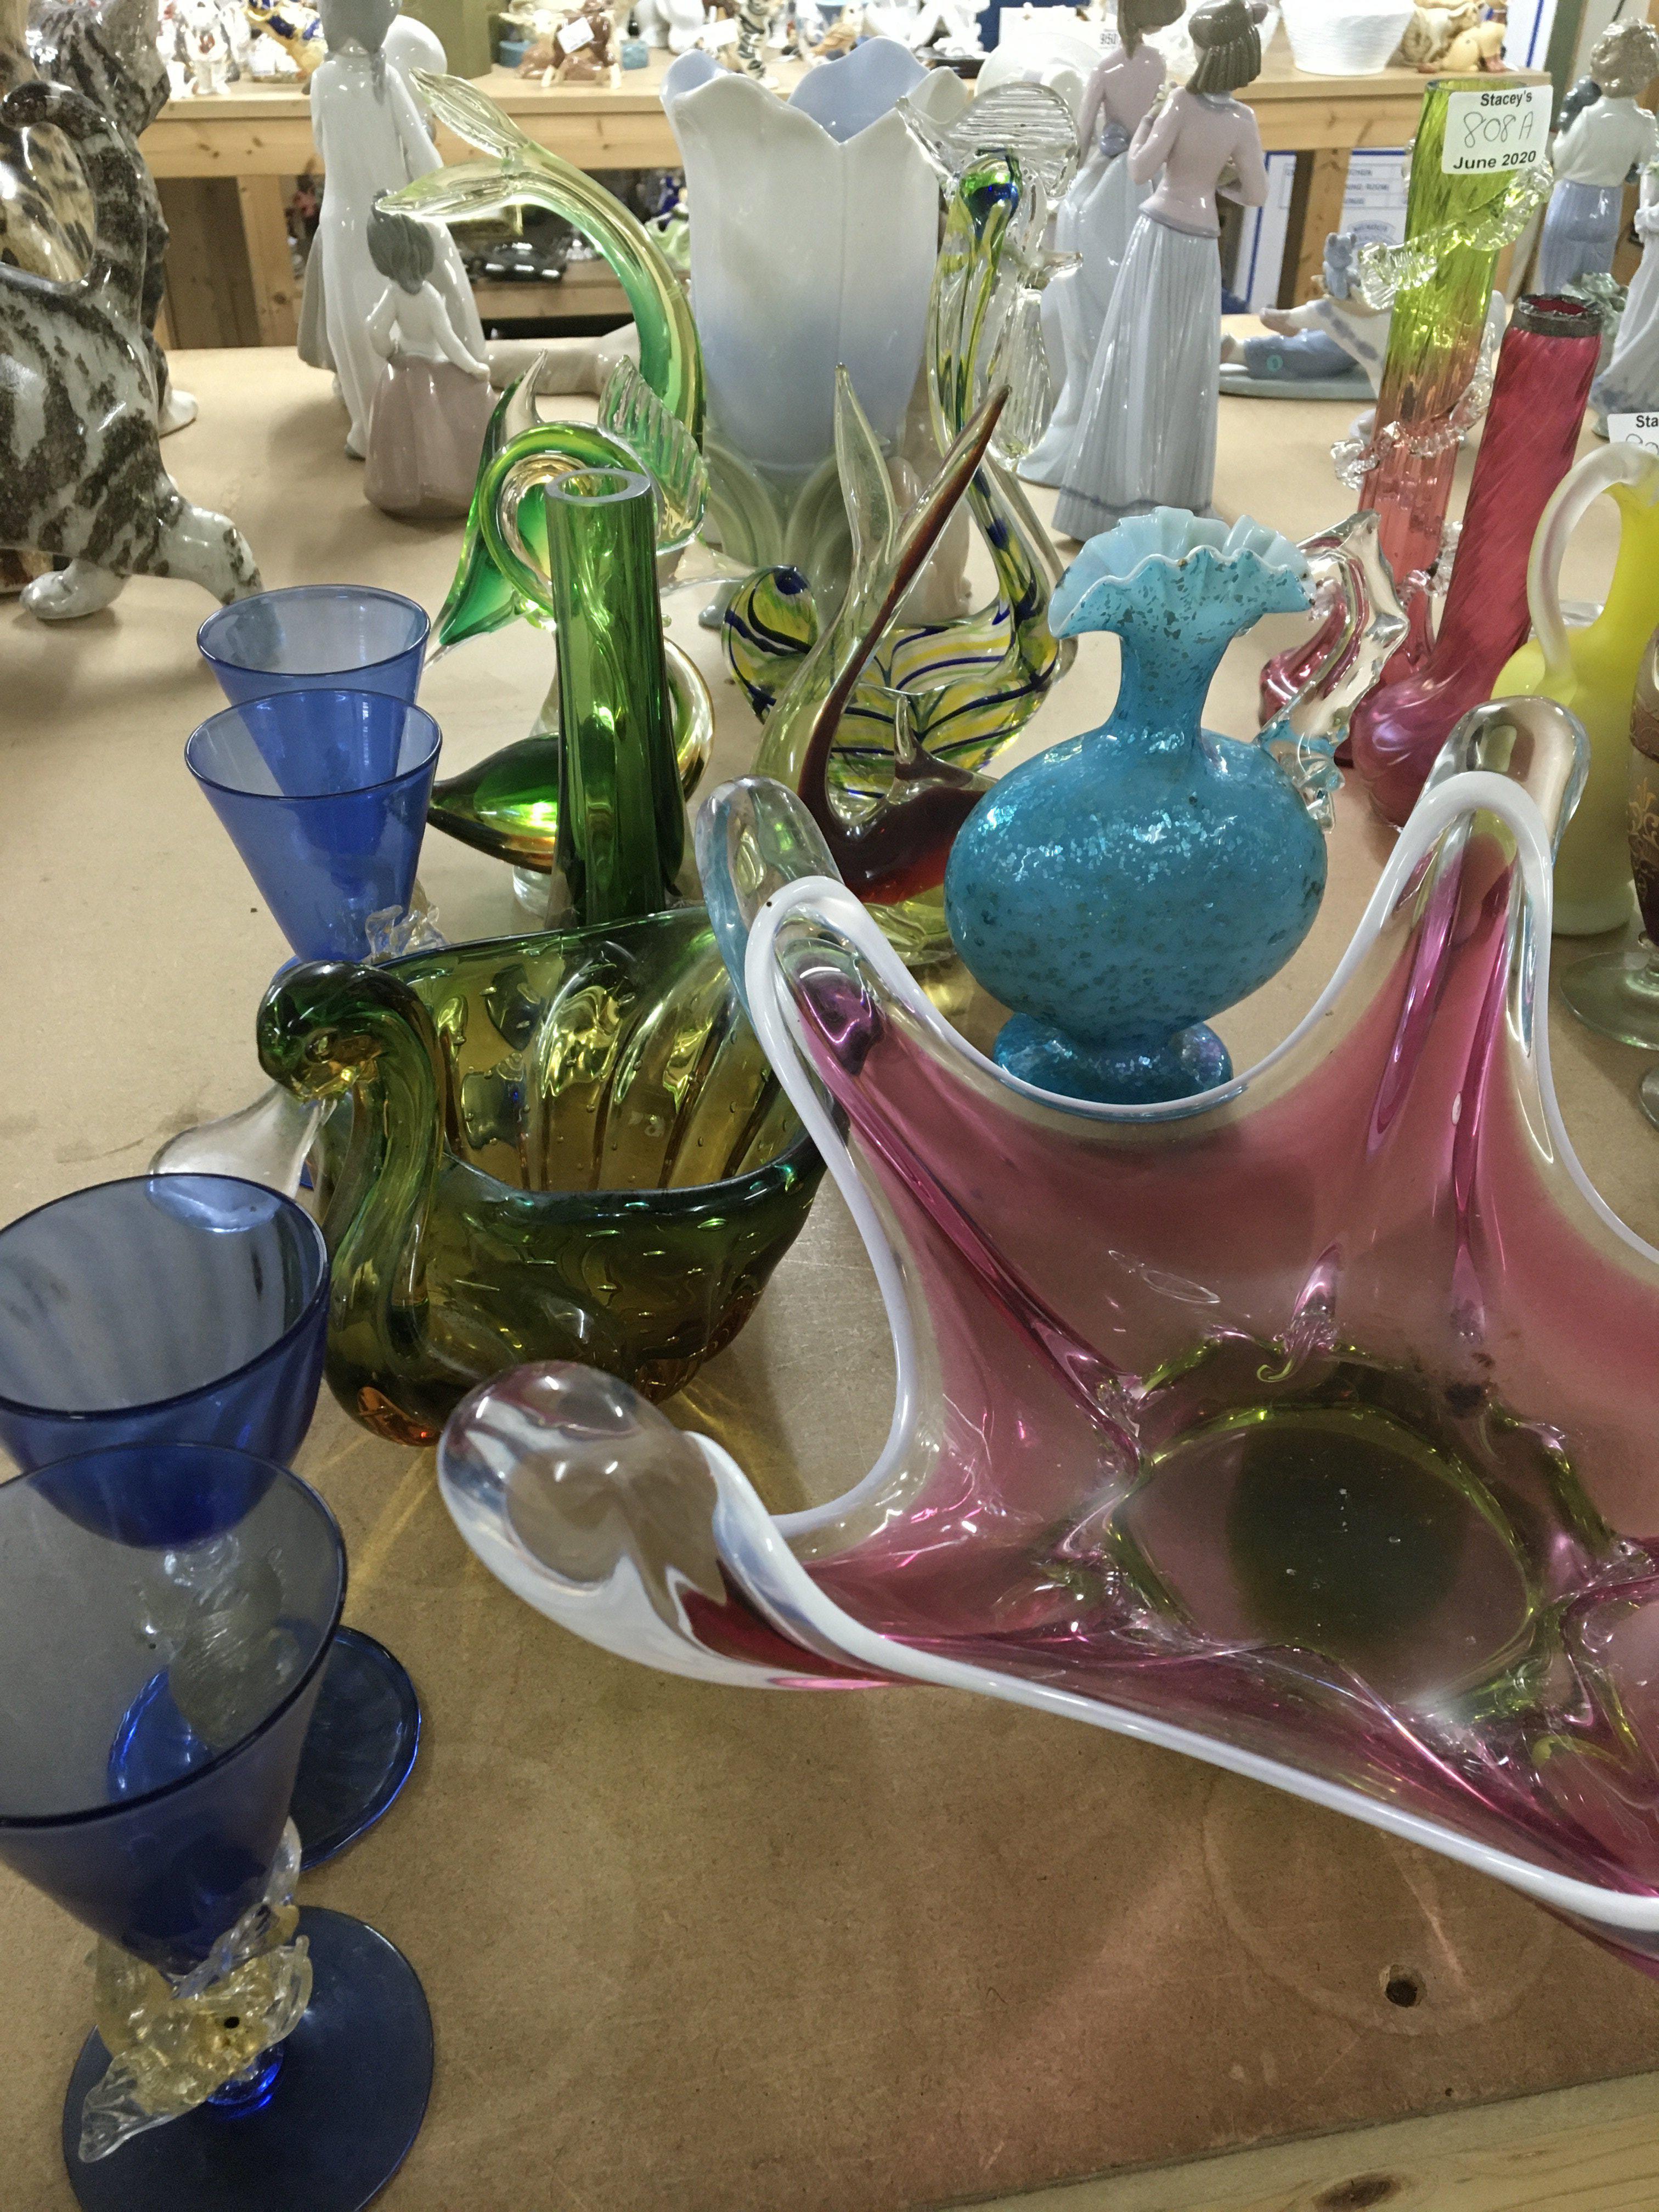 A collection of Murano glass ware various.